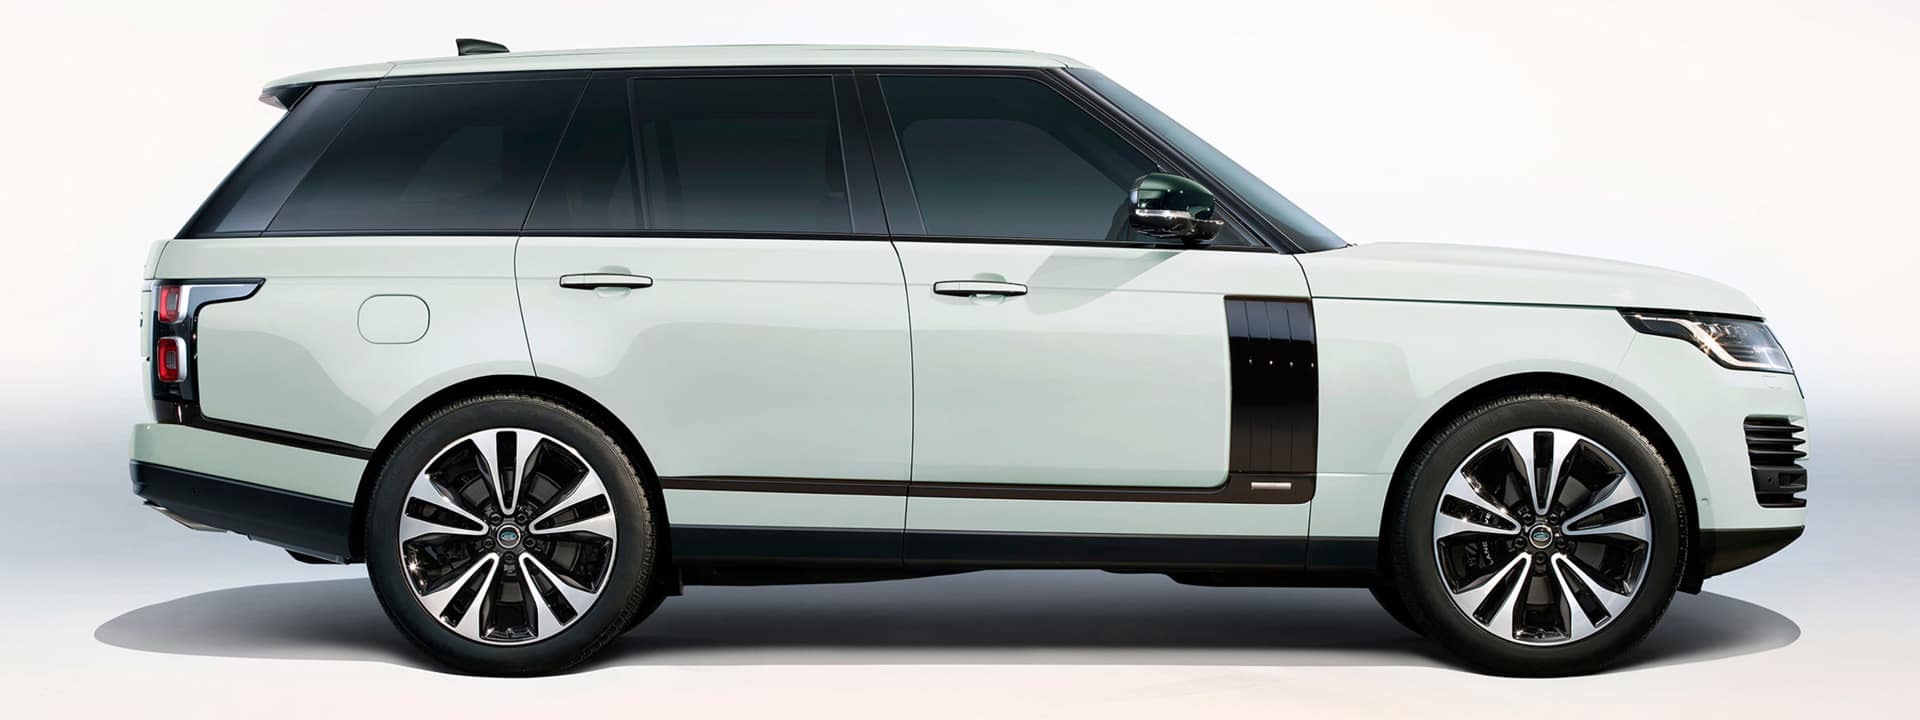 2021 Range Rover For Sale in OKC | Land Rover Oklahoma City